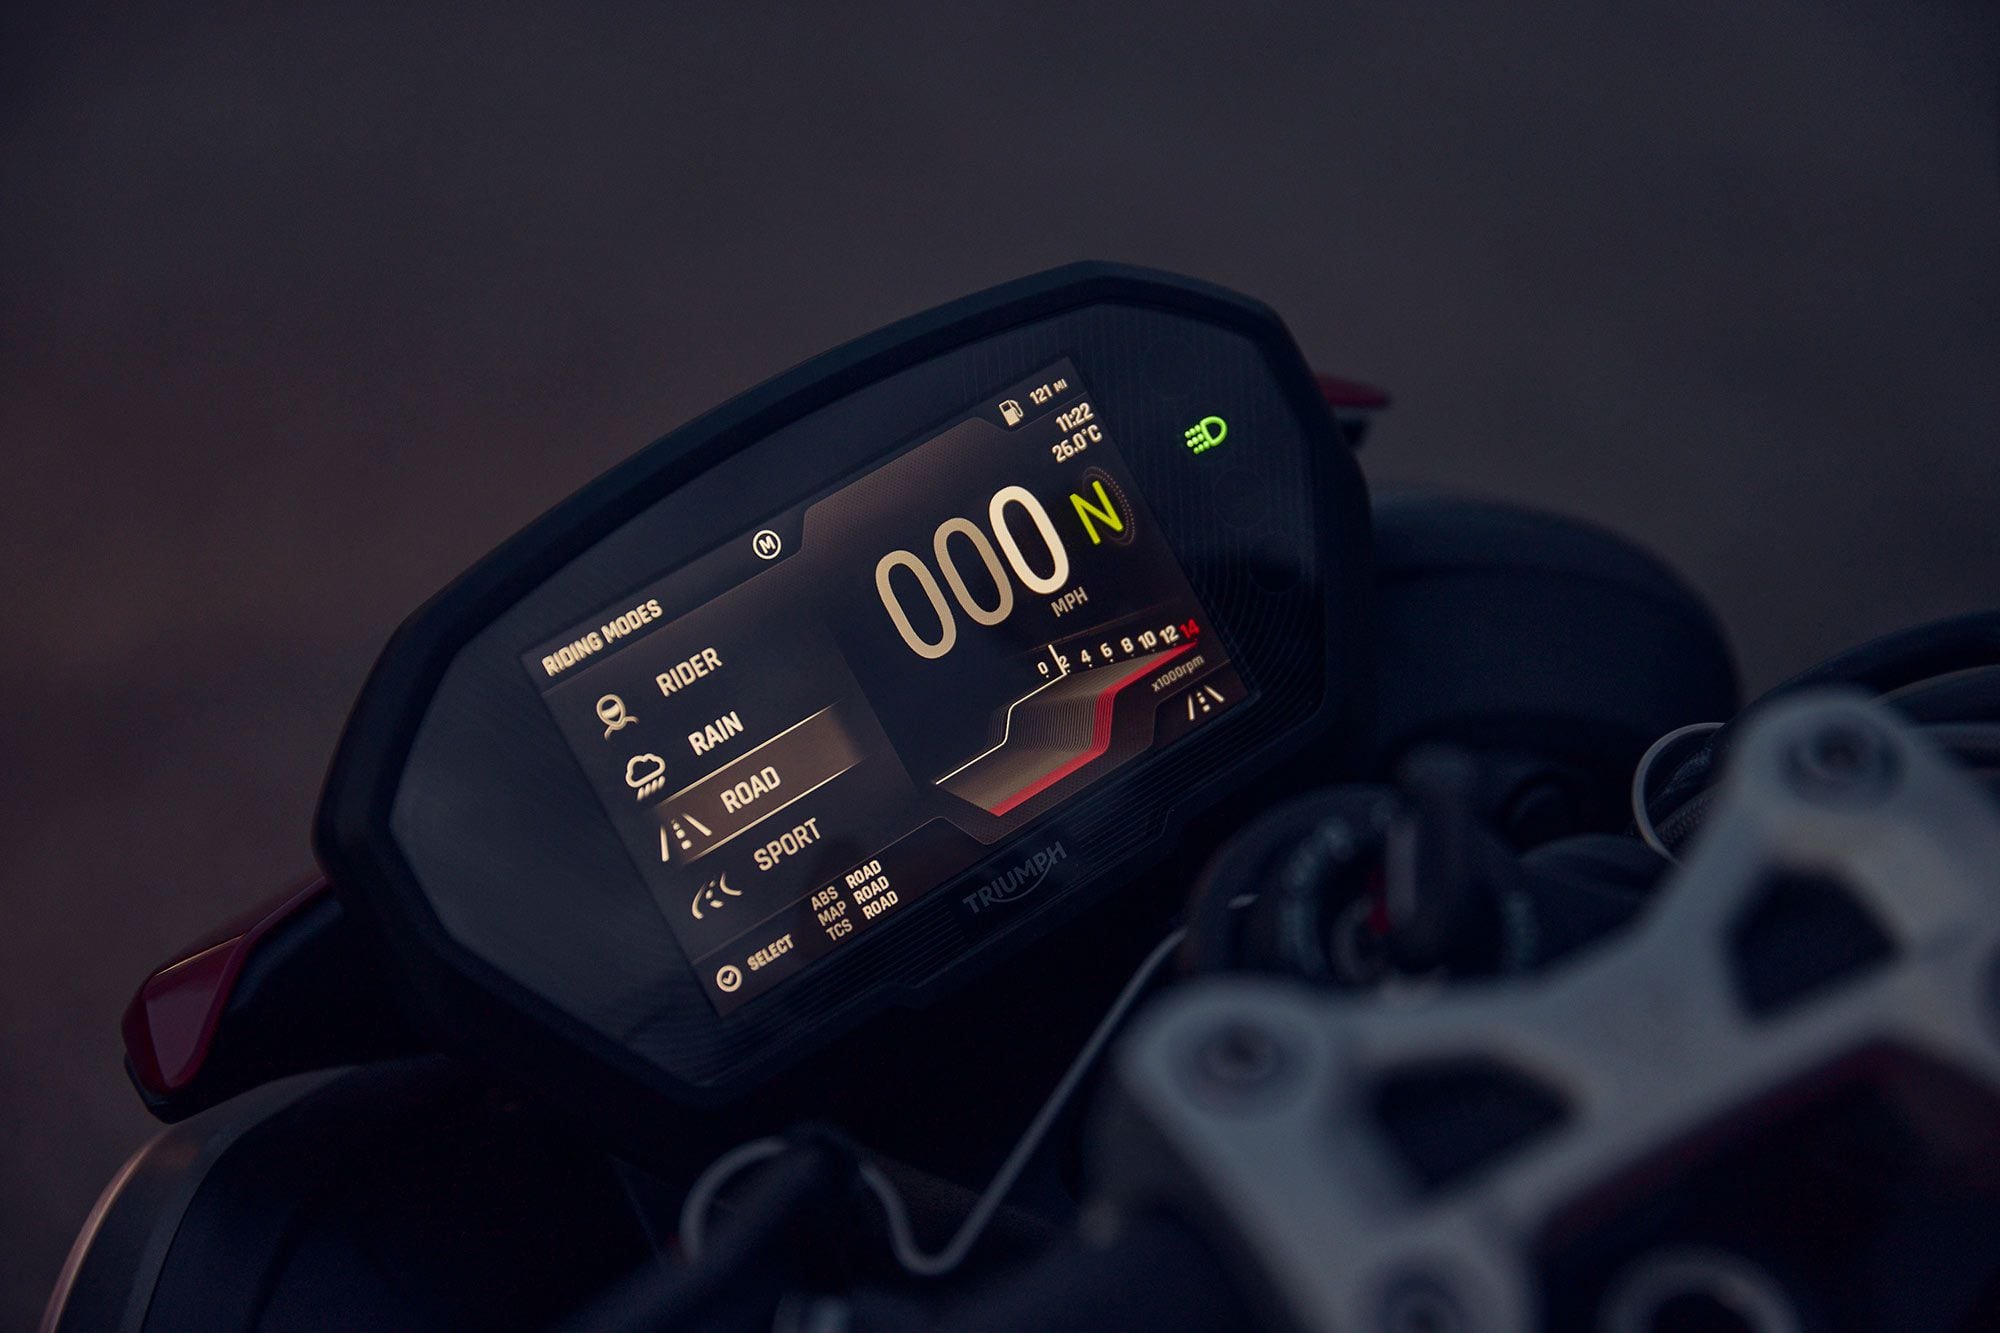 The Street Triple RS and Moto2 5-inch TFT display, by comparison.